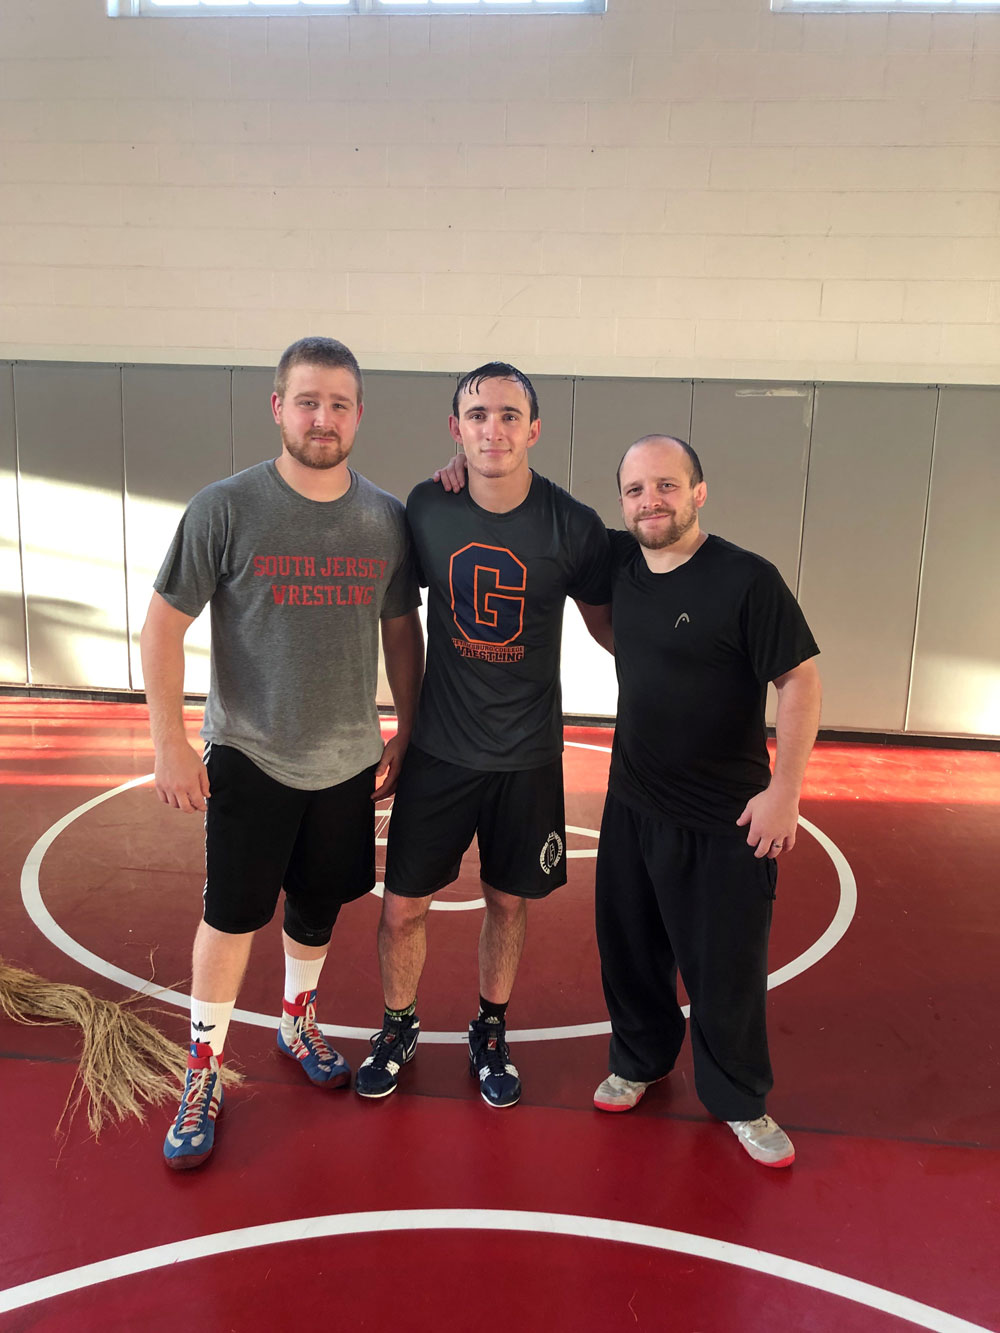 Sean Thompson posing with two other wrestlers in a gym